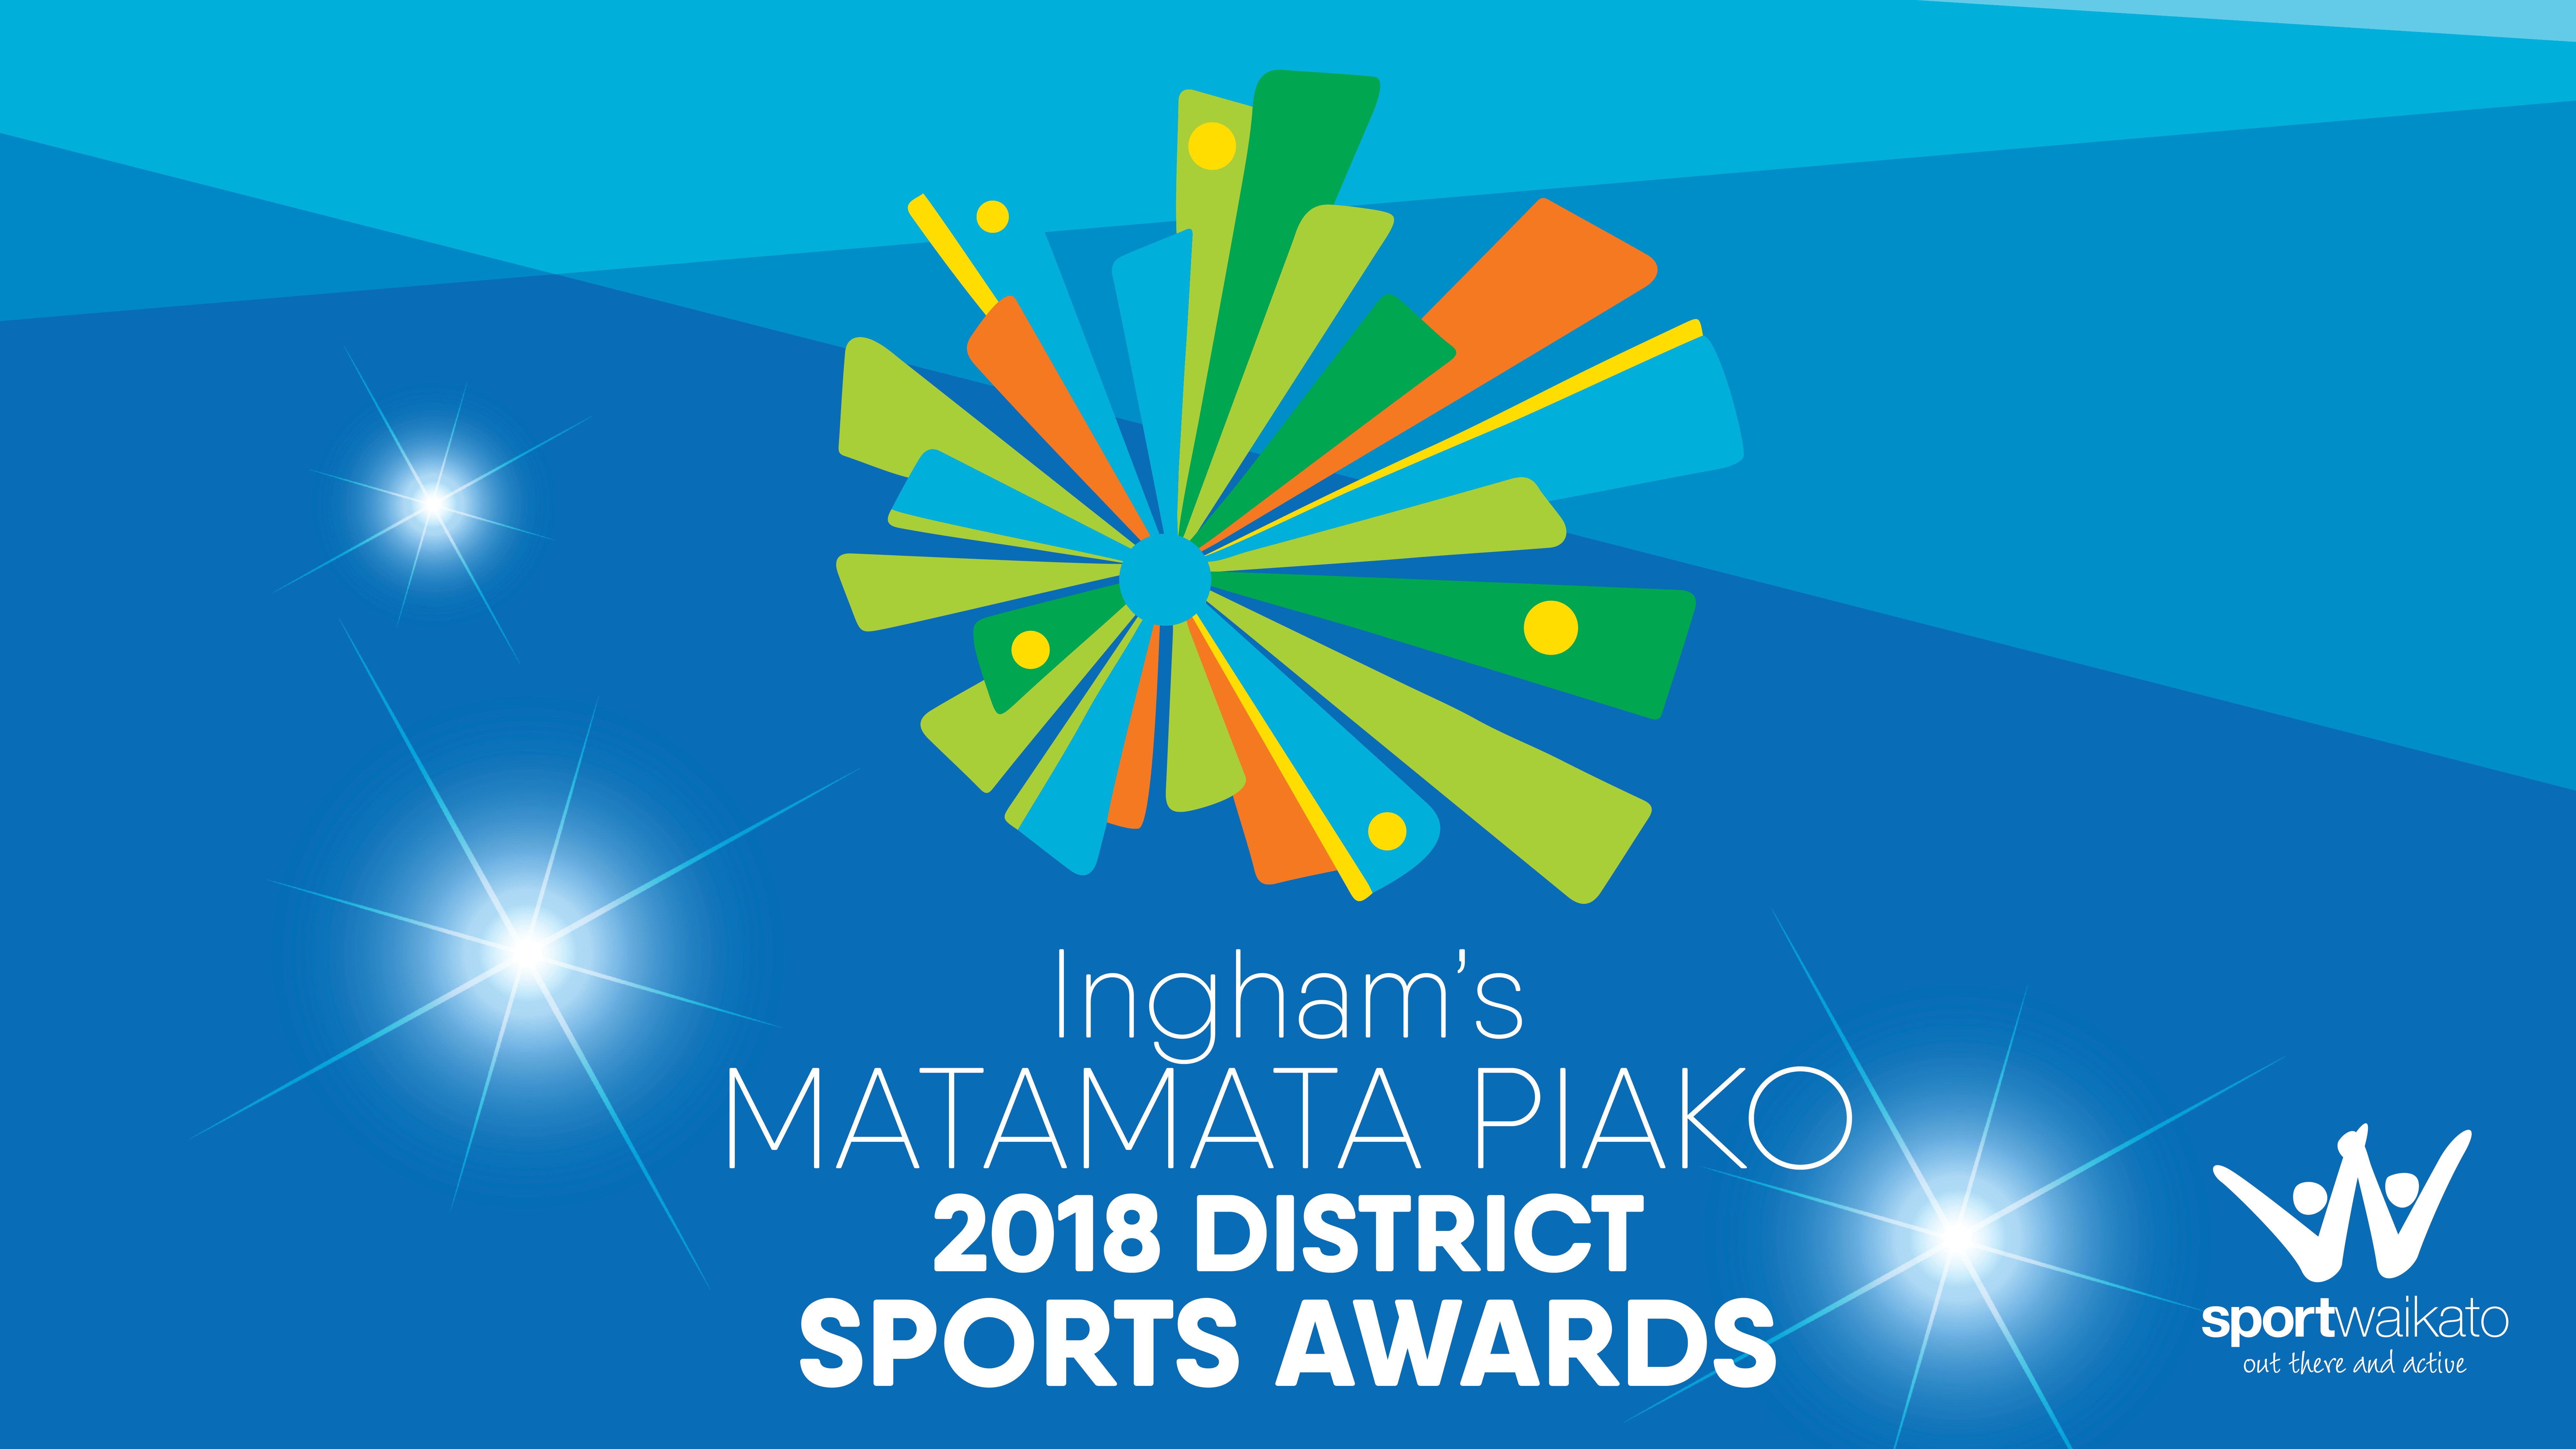 Ingham’s Matamata Piako District Sports Awards nominations are in!